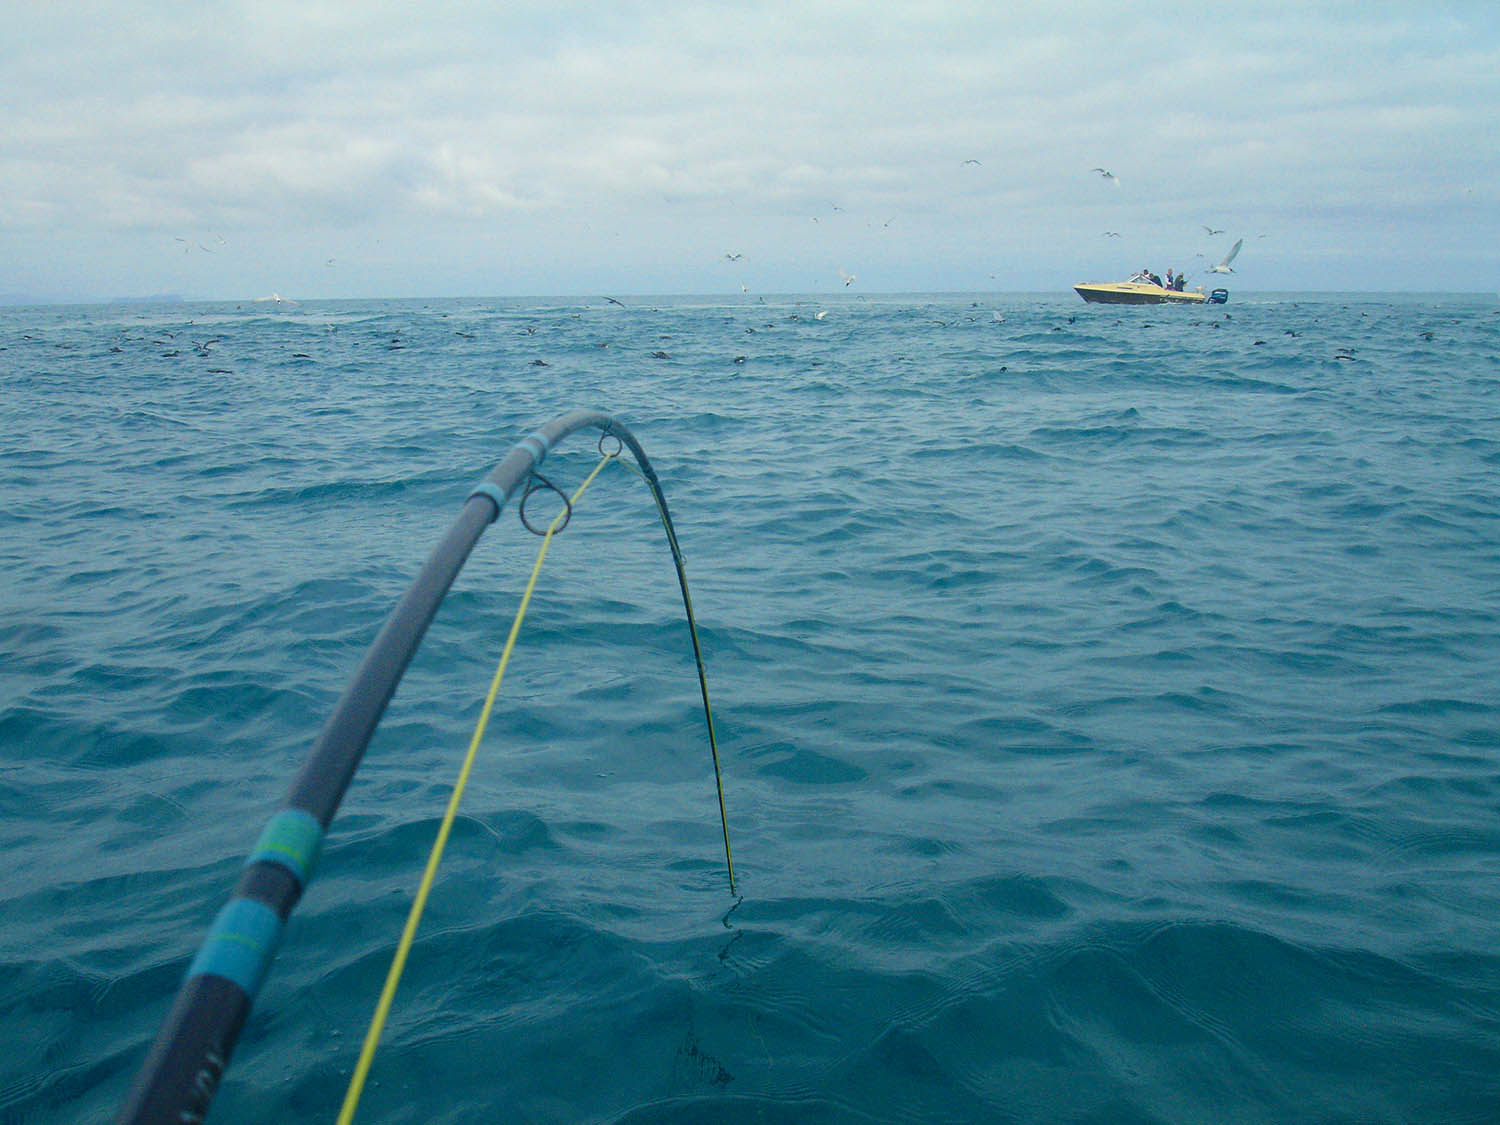 rod bent with kahawai on the line, at sea with birds diving and fishing boat in background